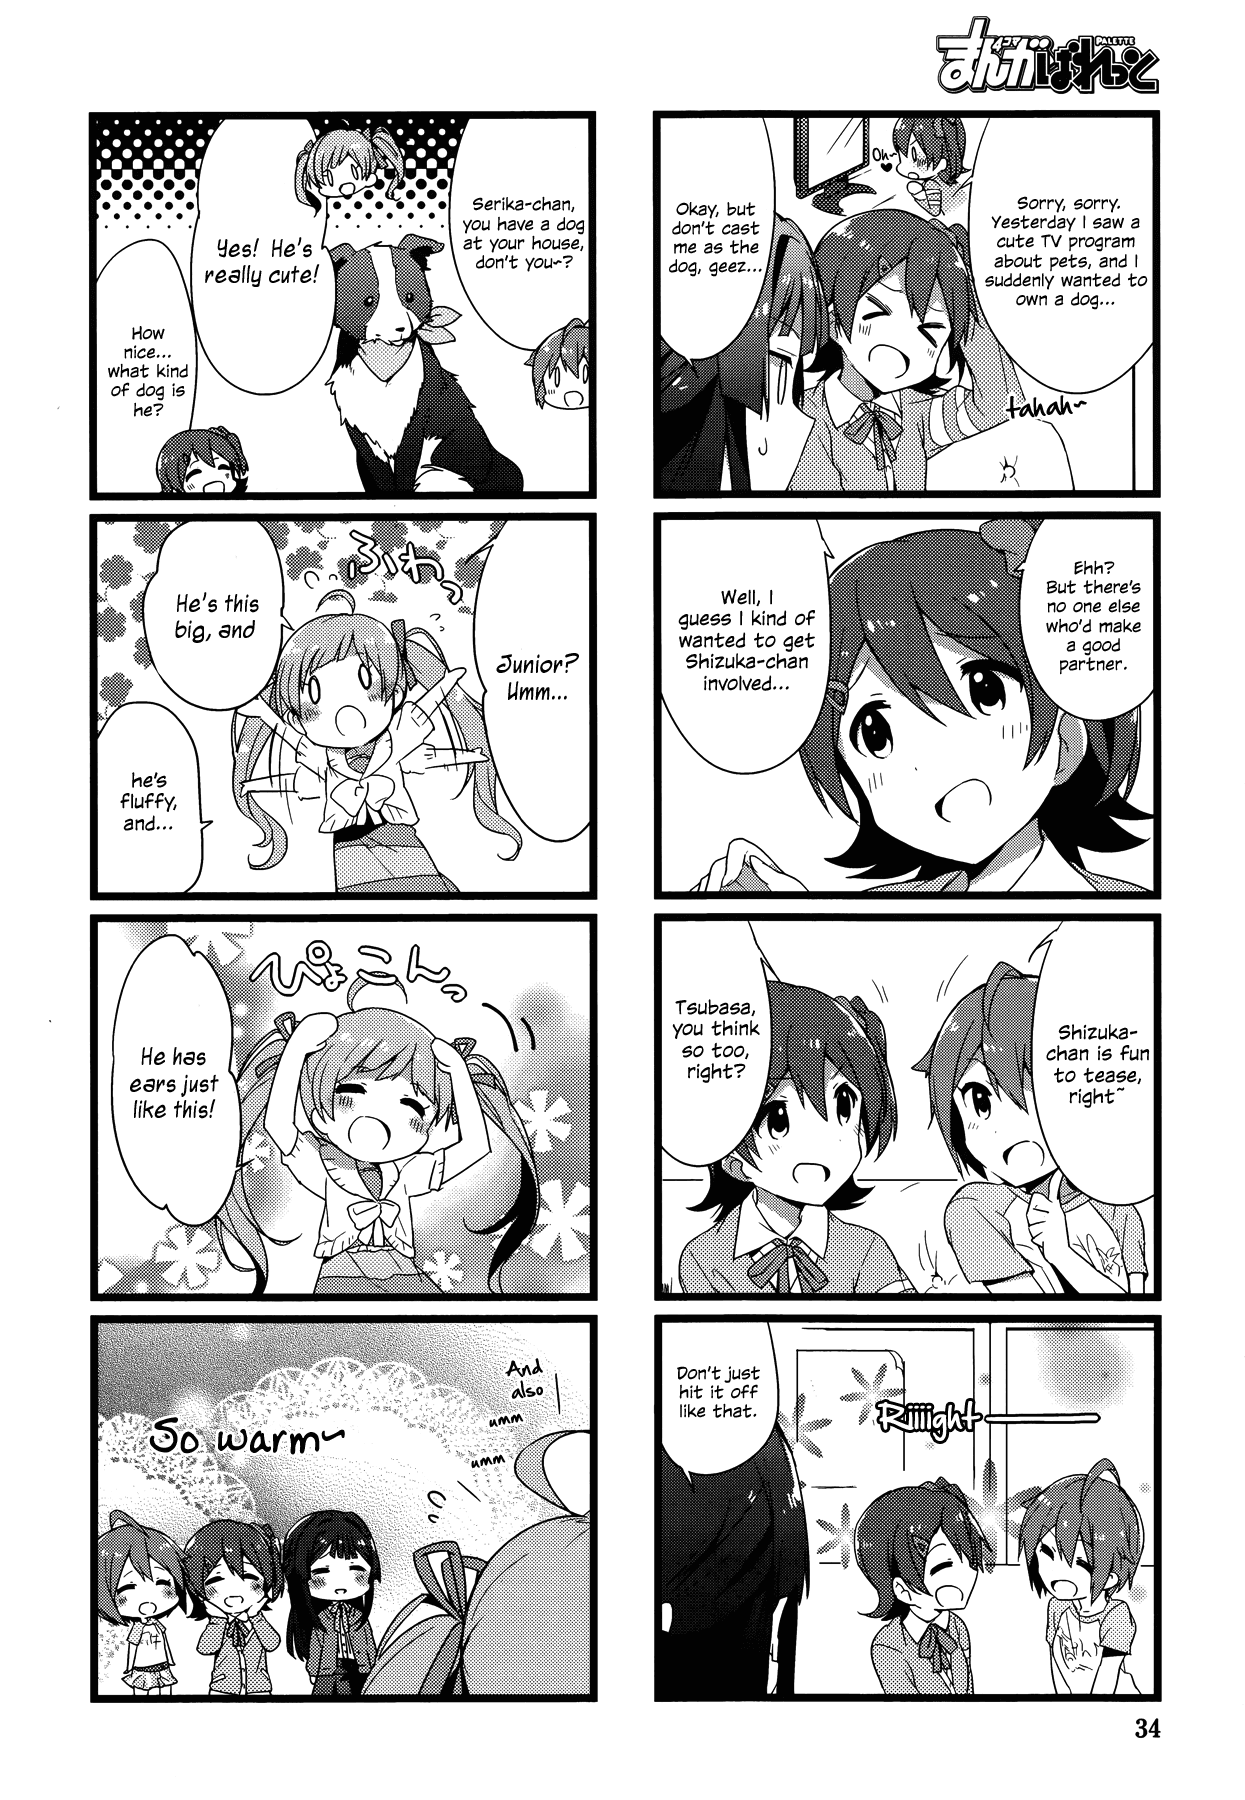 The Idolm Ster Million Live Back Stage Vol 1 Chapter 4 Mangahasu